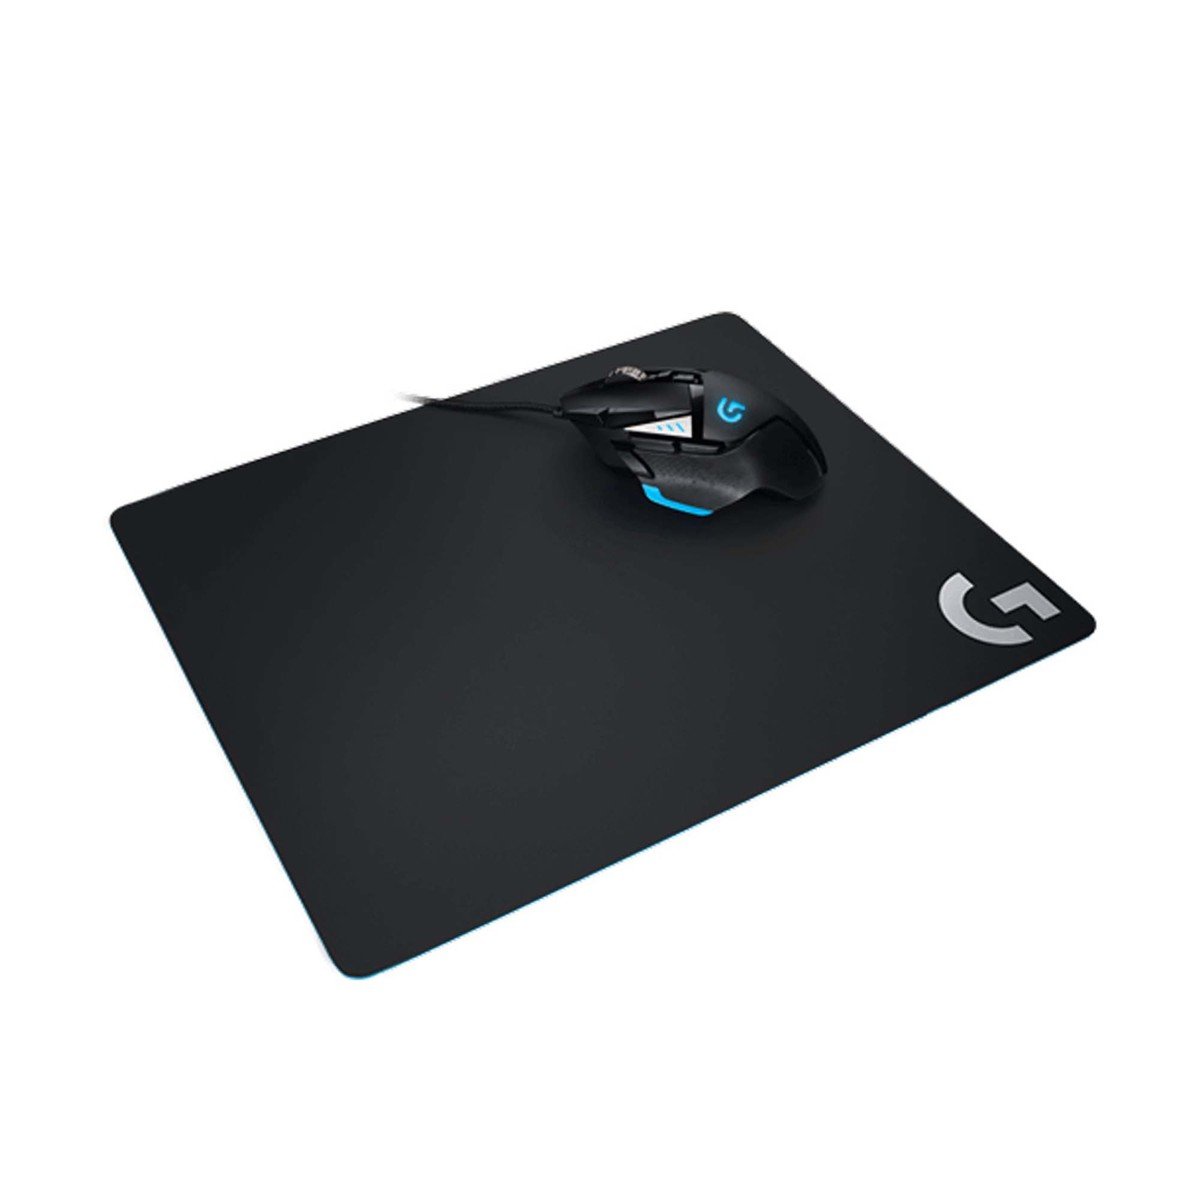 Logitech Mouse Pad G240 Gaming